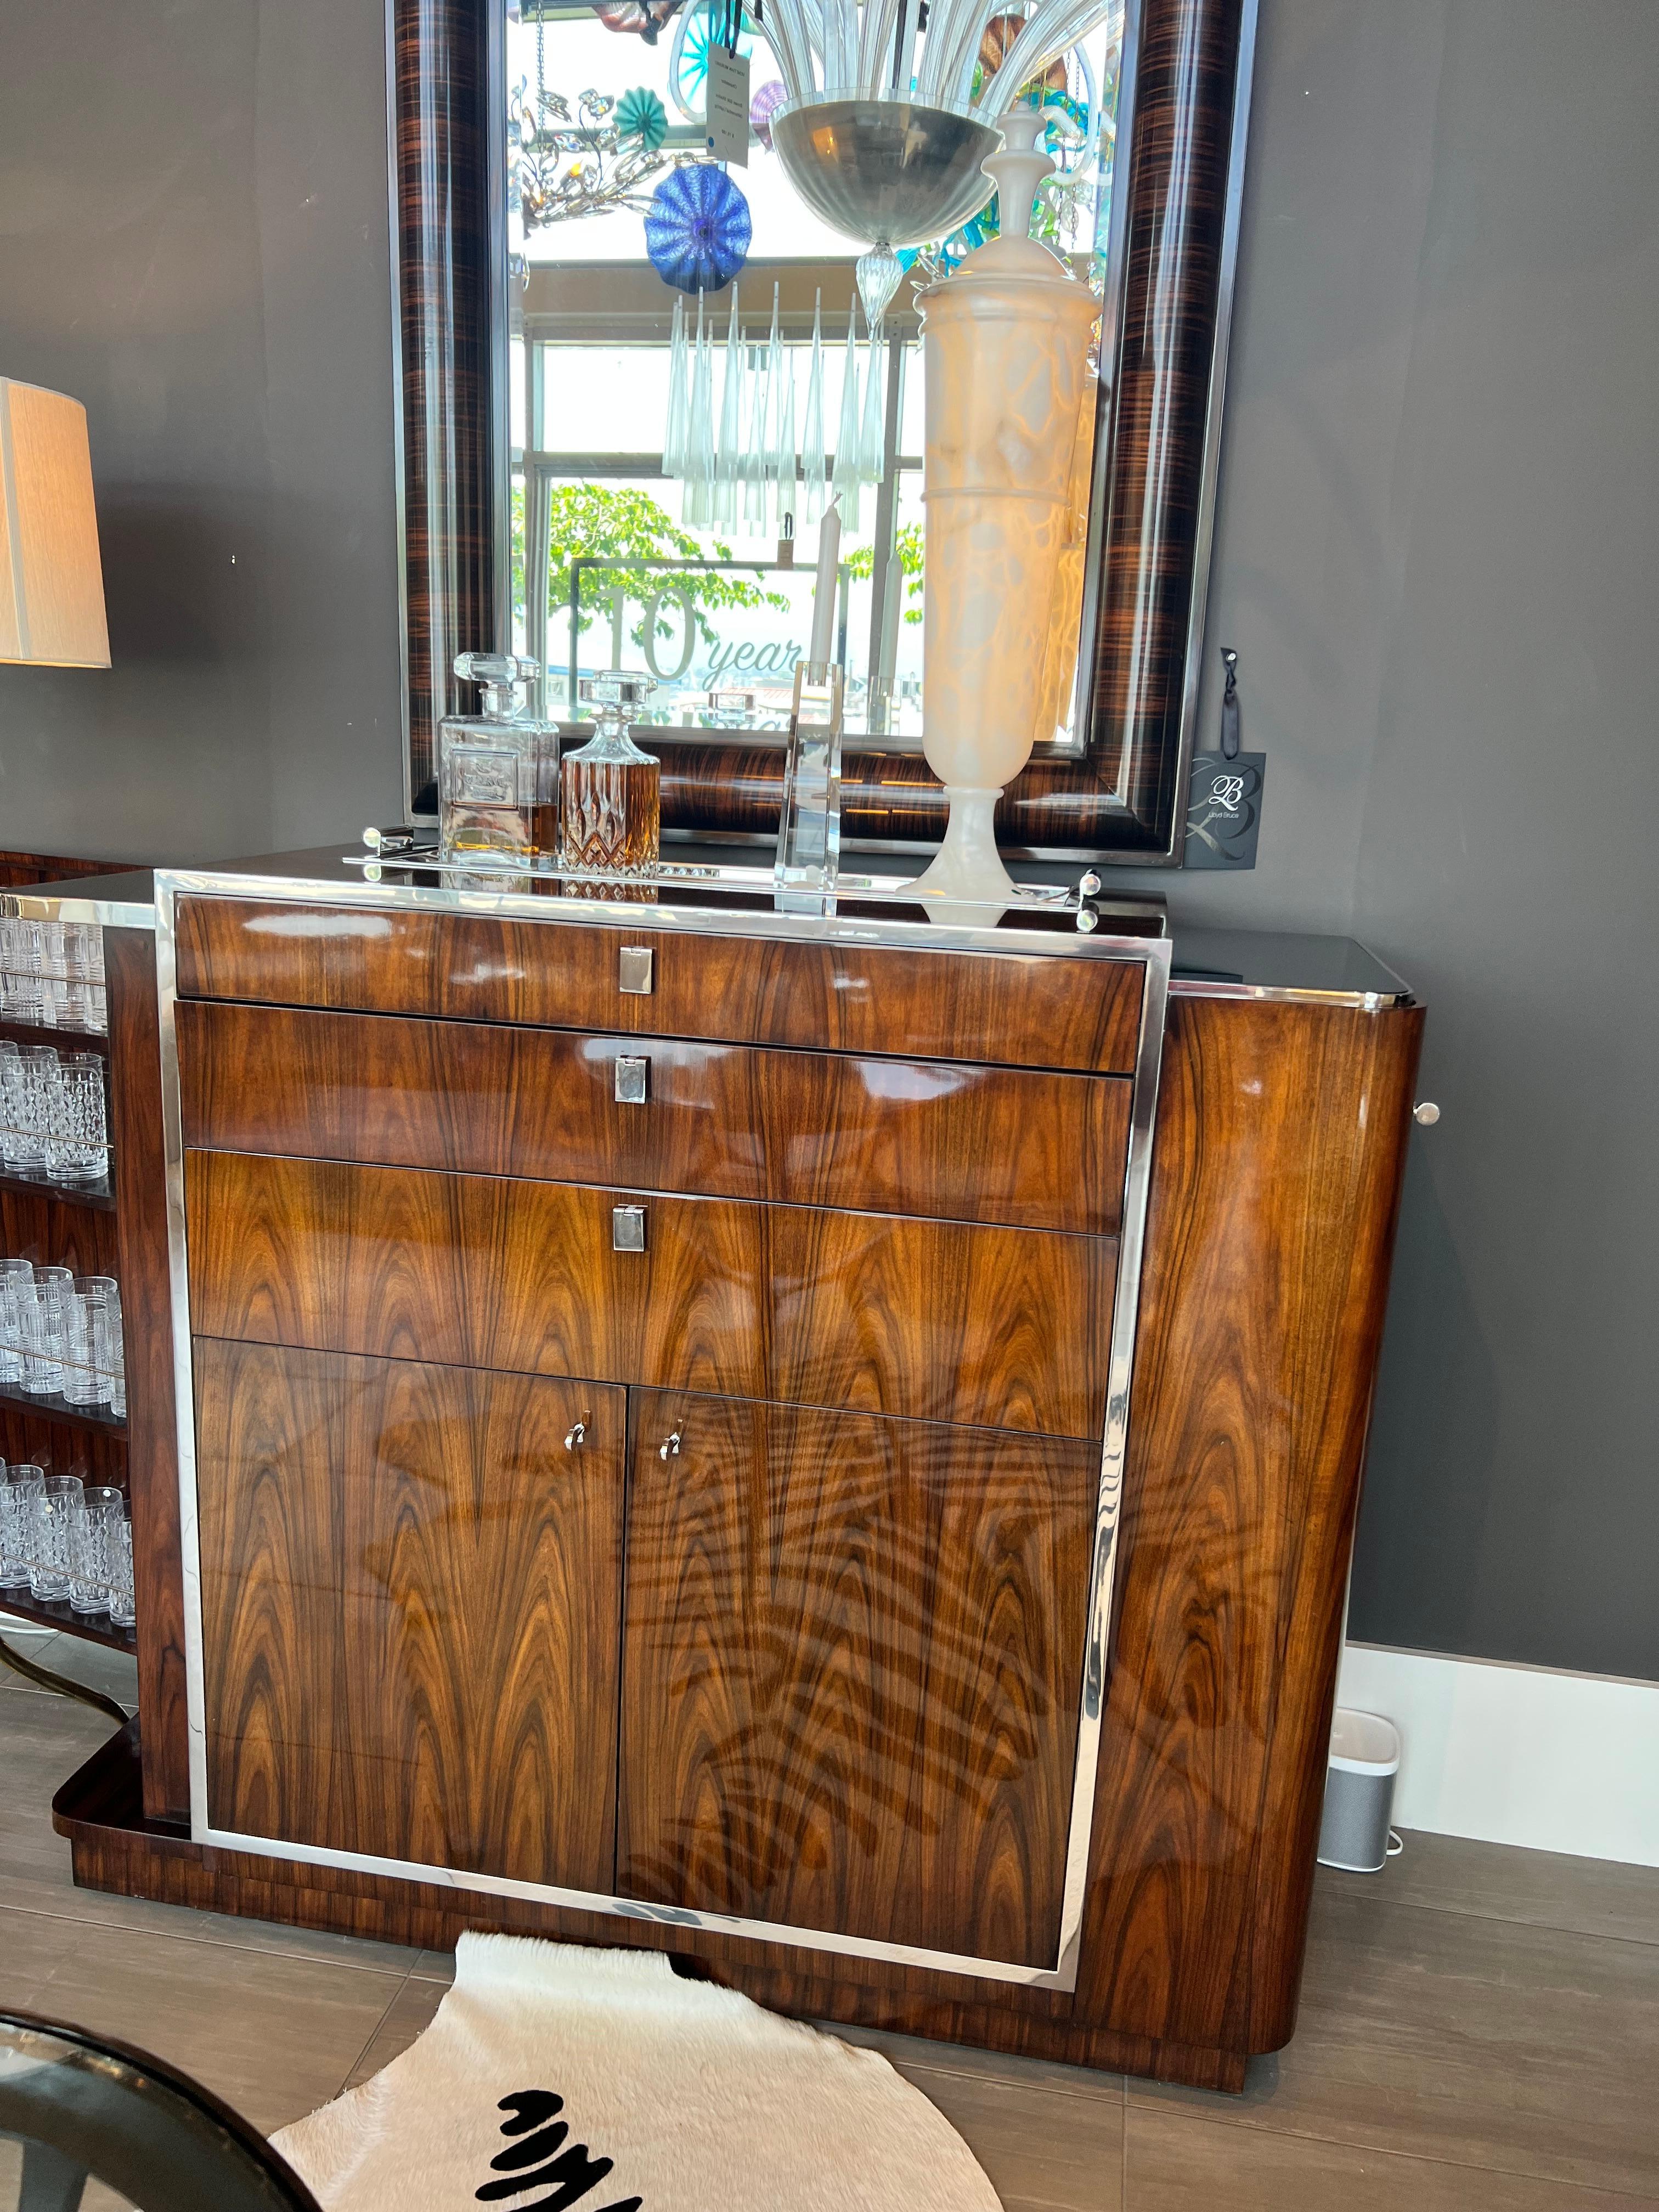 This beautiful dry bar is designed by Ralph Lauren.
It has rosewood veneer and nickel plating. The top tray is removable. Top drawer felt lined. Second drawer pulls out as an additional serving area with smoked glass surface.
Glass and bottle